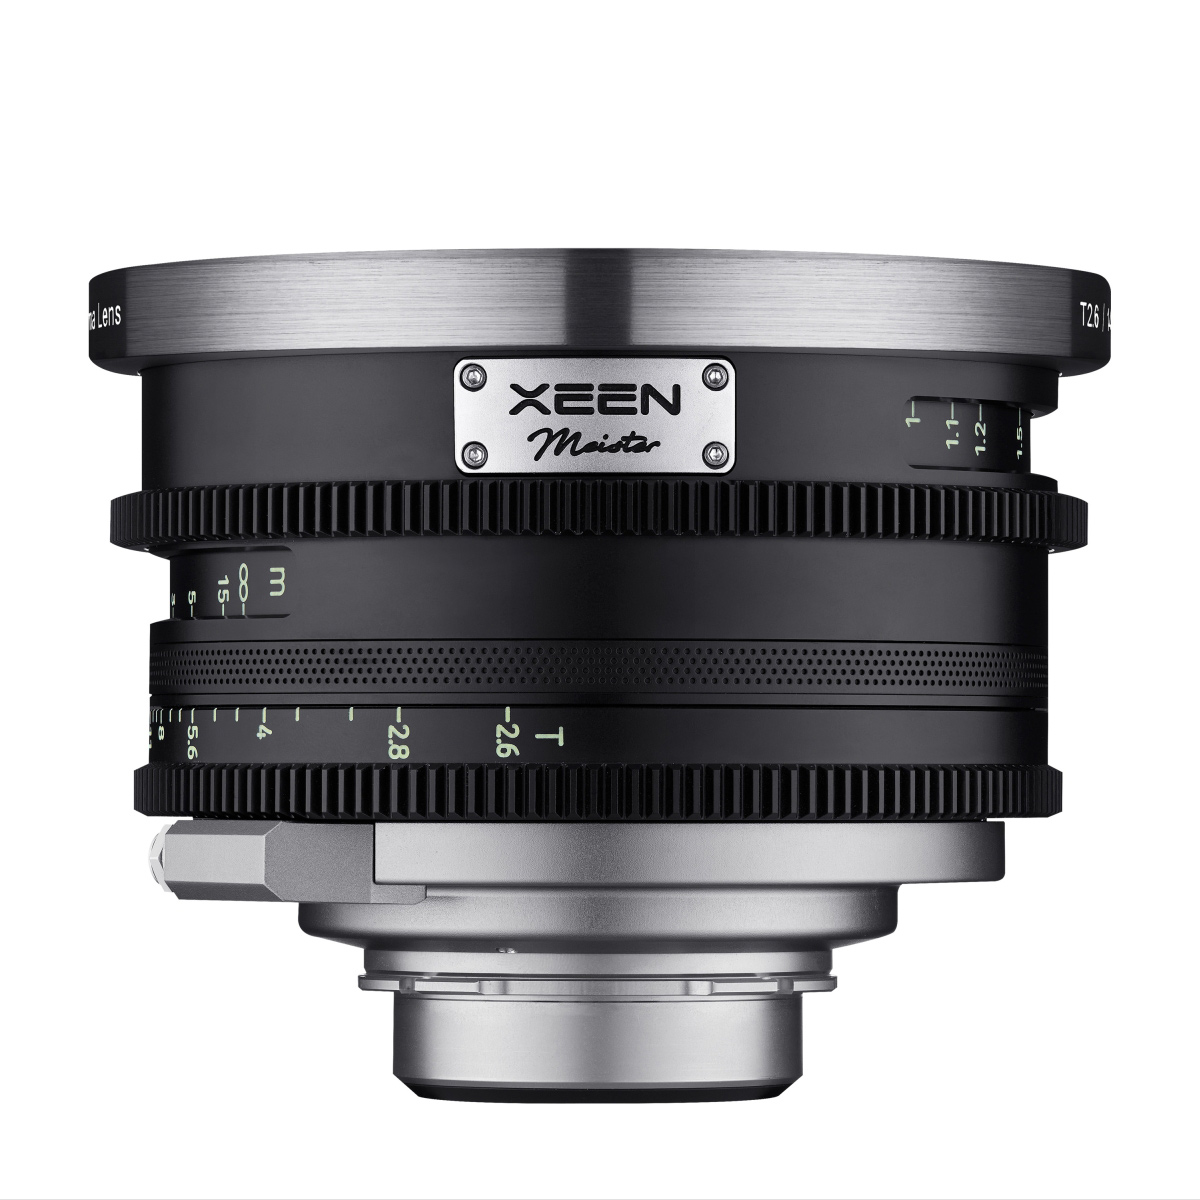 XEEN Meister 14mm T2.6 Canon EF-Mount